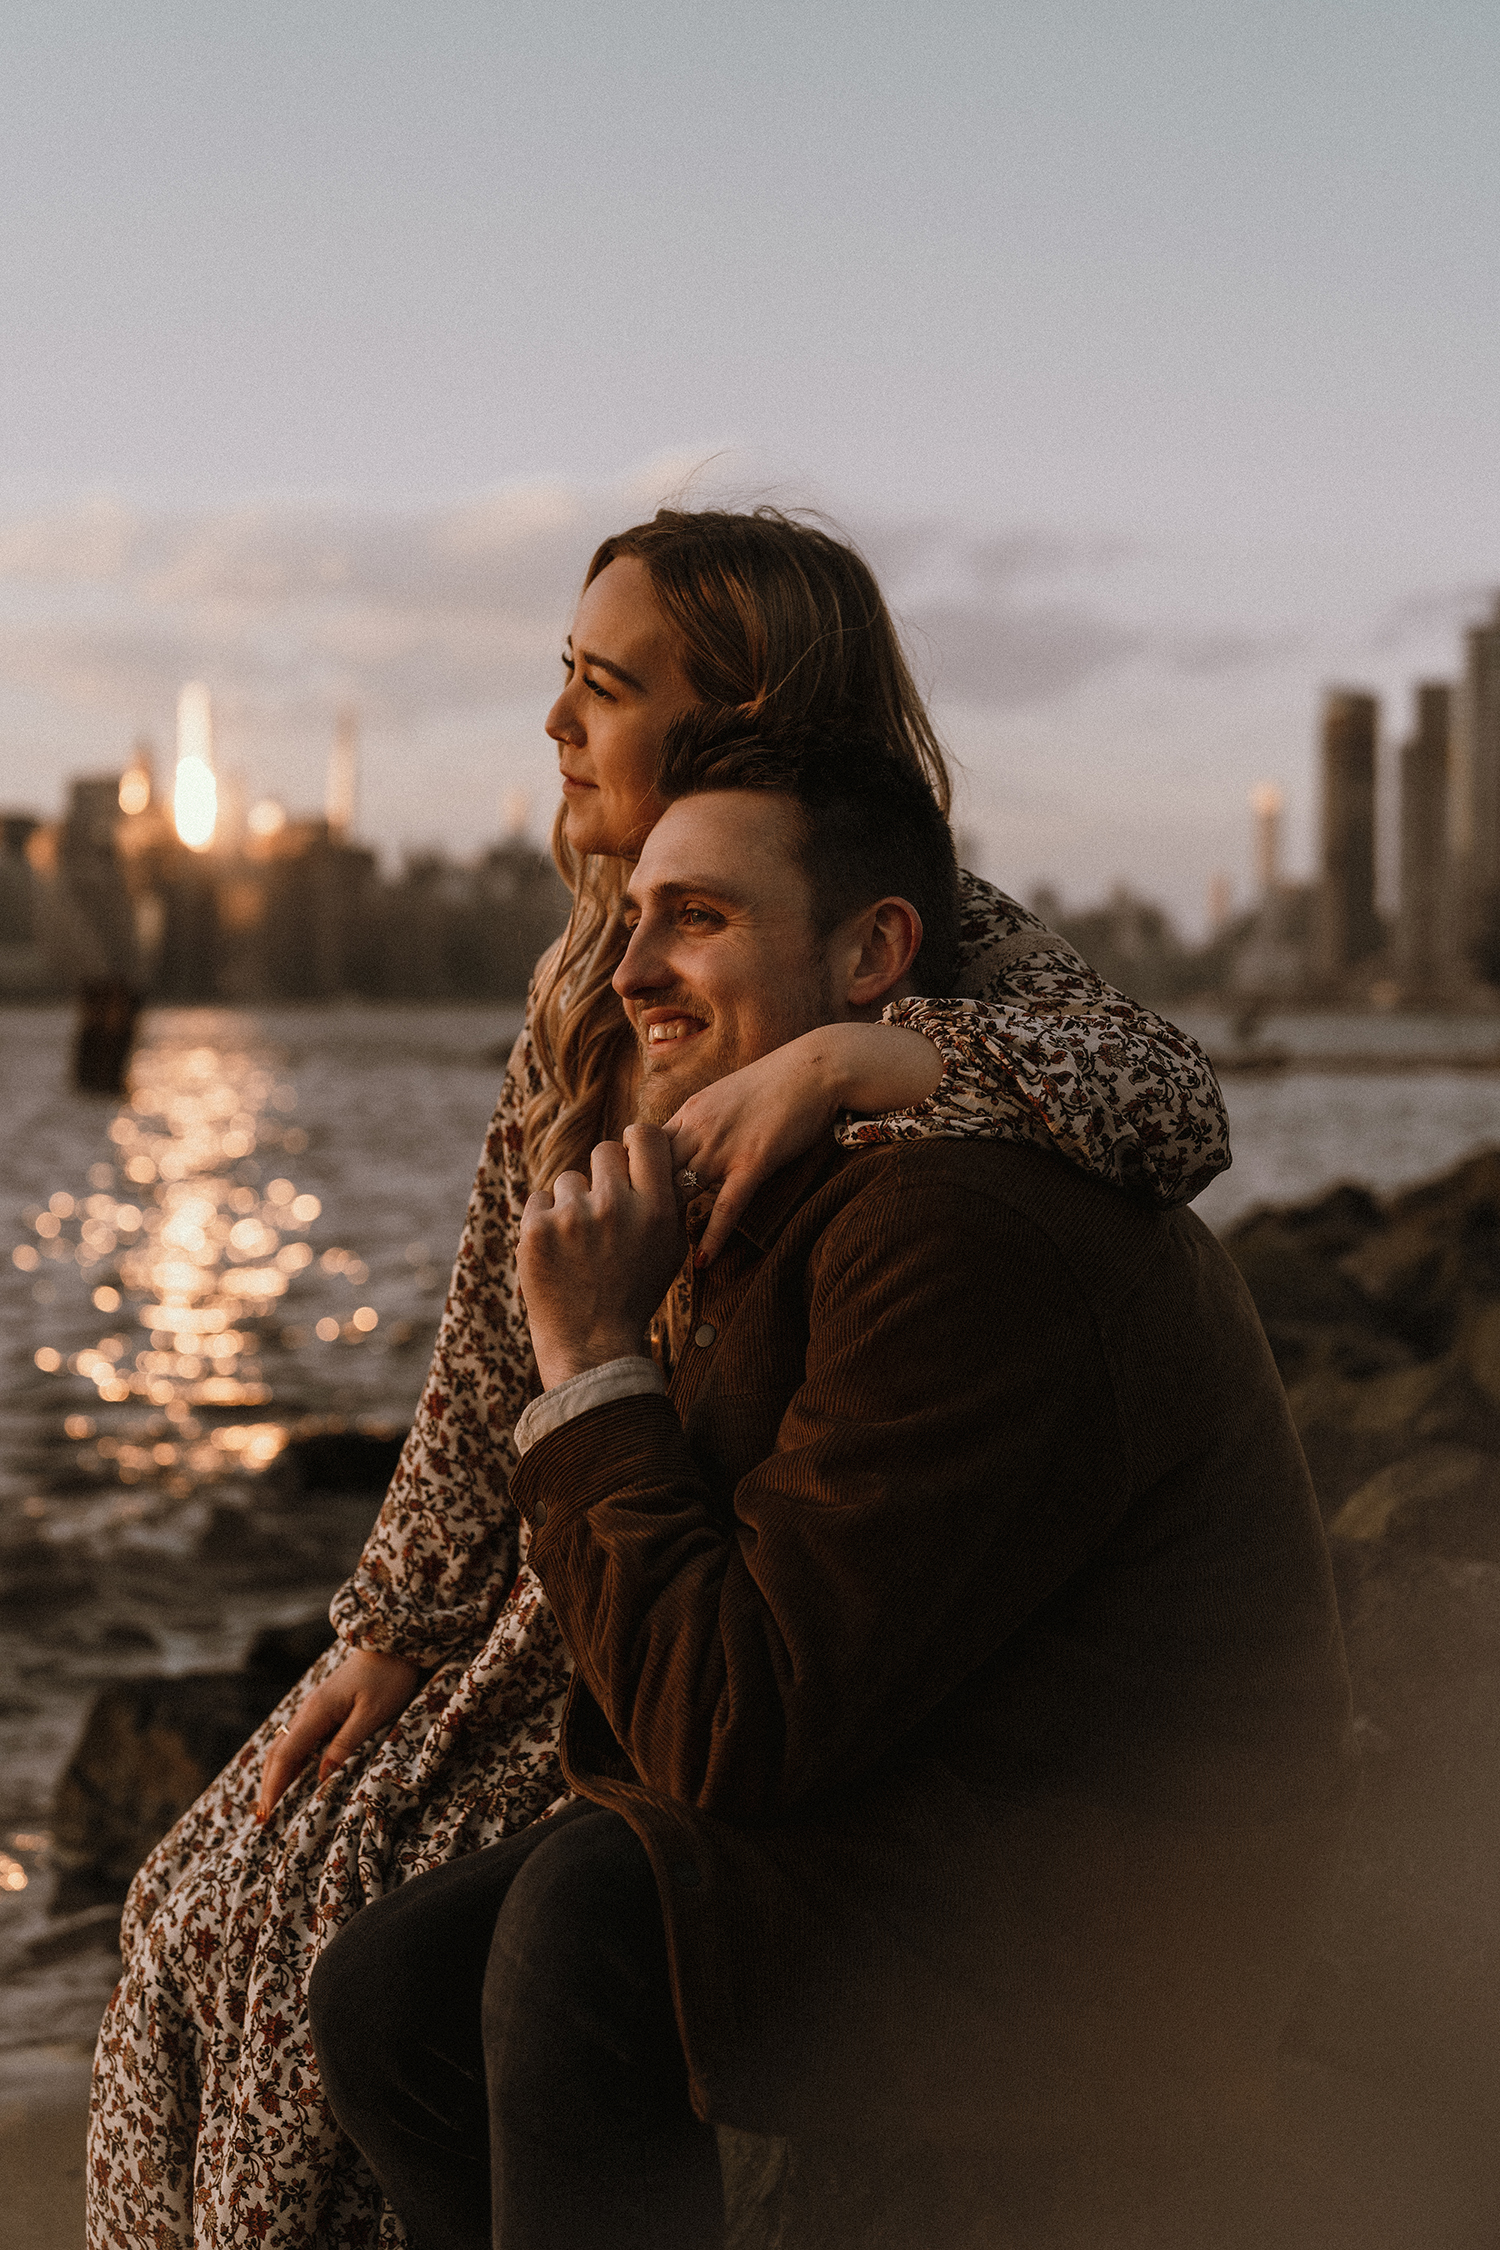 Engagement photos during blue hour looking out over the NYC skyline.